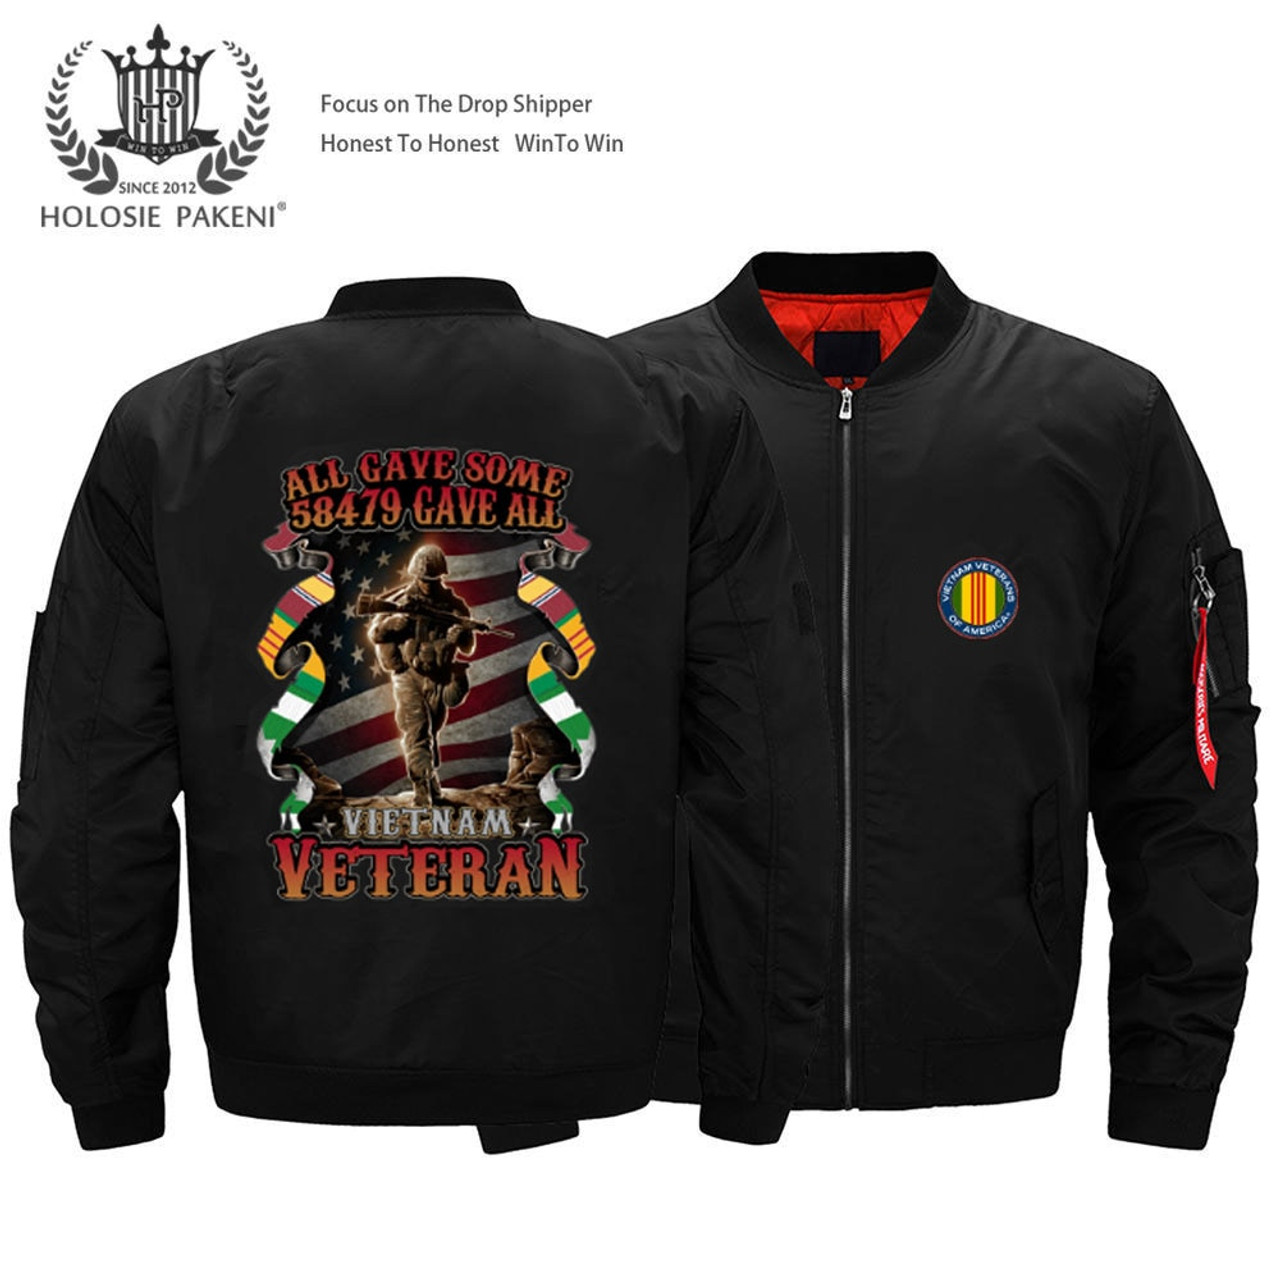 **(OFFICIALLY-LICENSED-U.S.MILITARY-VIETNAM-VETERANS-PREMIUM-THICK-FLIGHT-BOMBER-JACKETS/ALL-GAVE-SOME & 58479-FALLEN-GAVE-ALL/VIETNAM-VETERANS-NICE-CUSTOM-3D-GRAPHIC-PRINTED-DOUBLE-SIDED-BOMBER/MA-1 FLIGHT-JACKETS,COMES-IN-CLASSIC-MIDNIGHT-BLACK)**